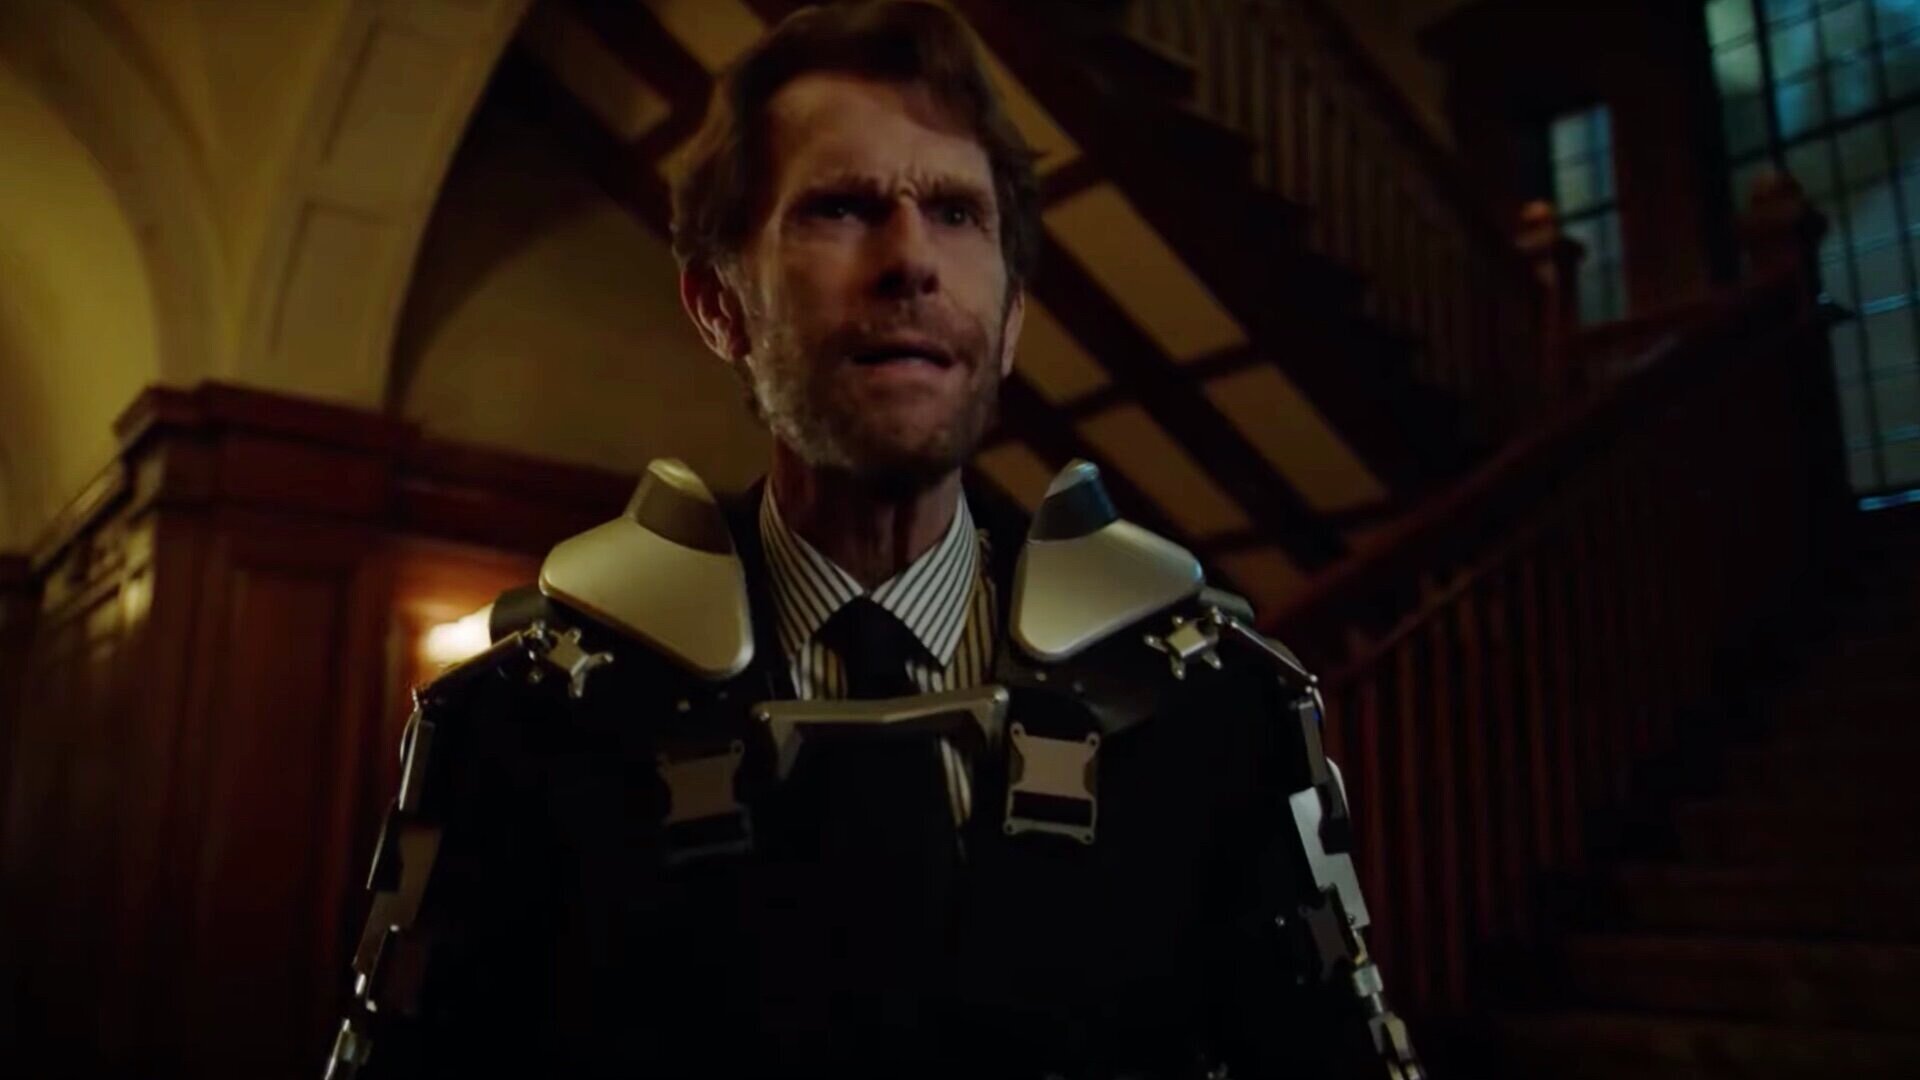 Kevin Conroy teases his live-action debut as an older Bruce Wayne